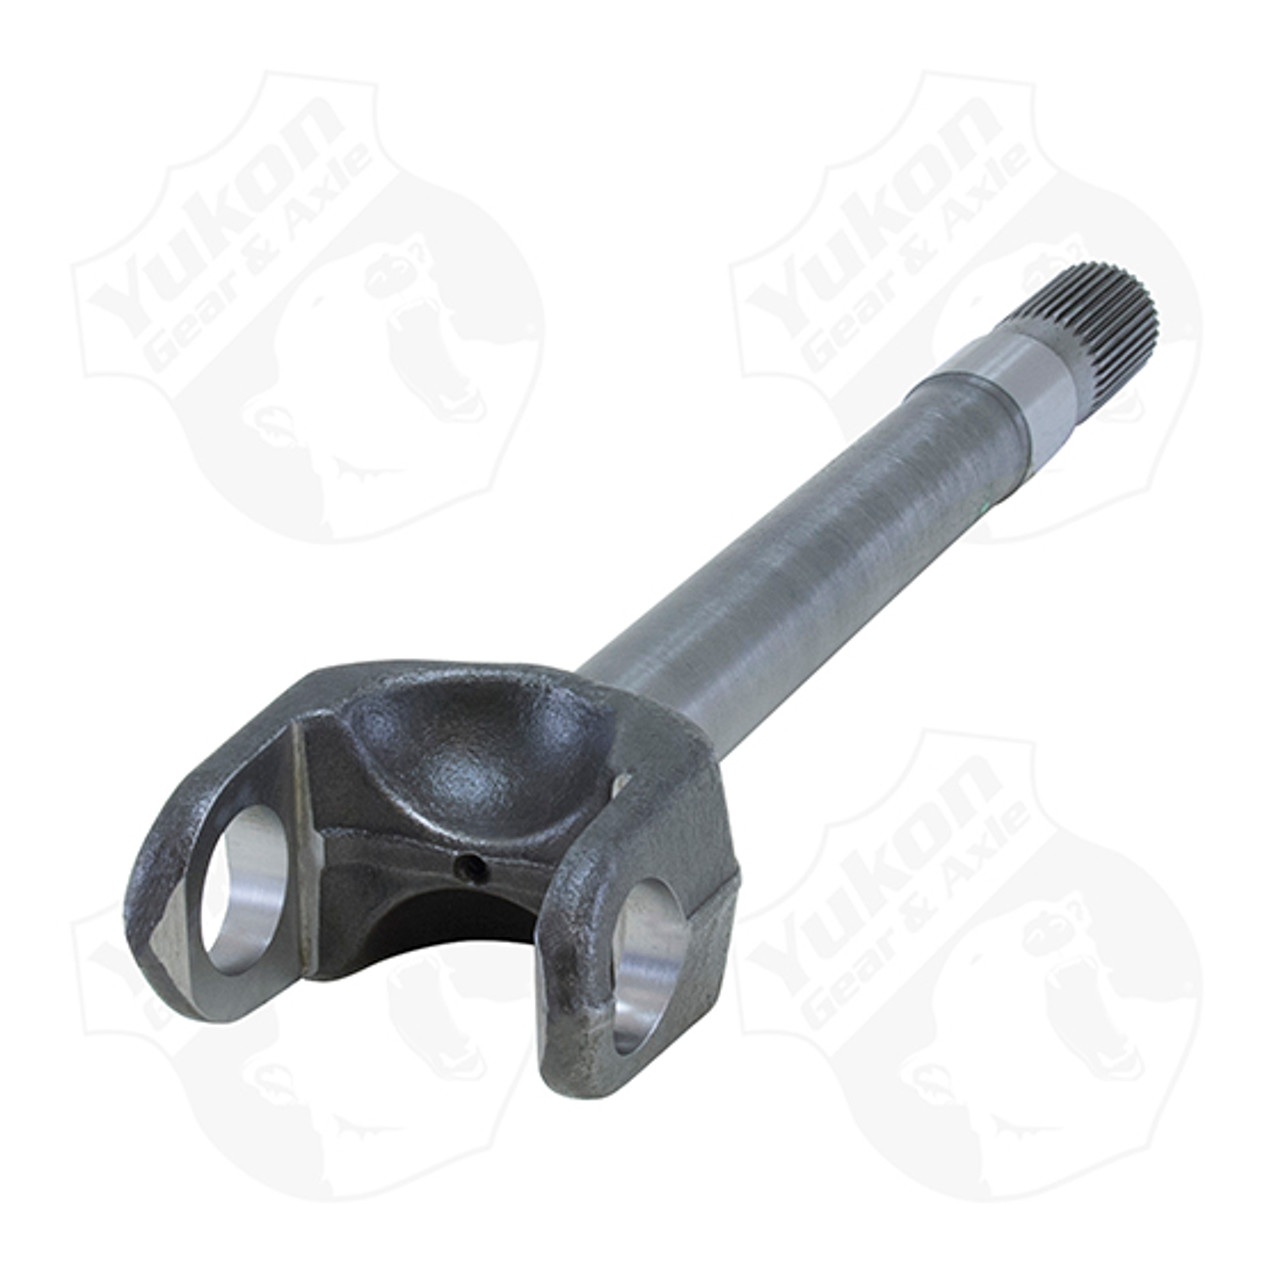 Yukon 4340 Chrome-Moly right hand inner replacement axle for Dana 30, '82-'86 Jeep CJ, uses 5-760X u/joint